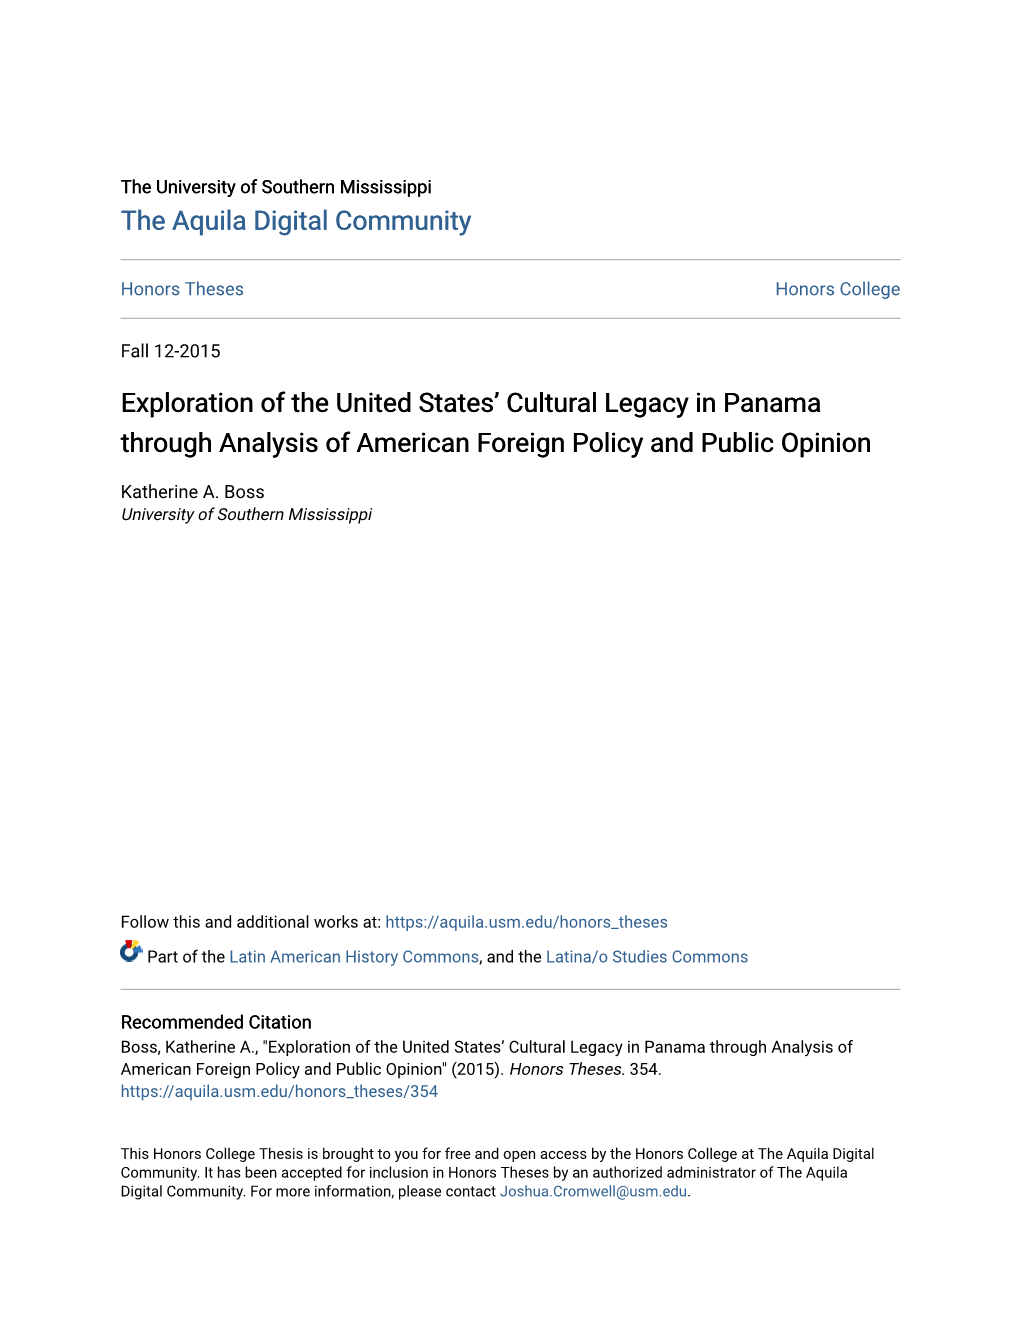 Exploration of the United States' Cultural Legacy in Panama Through